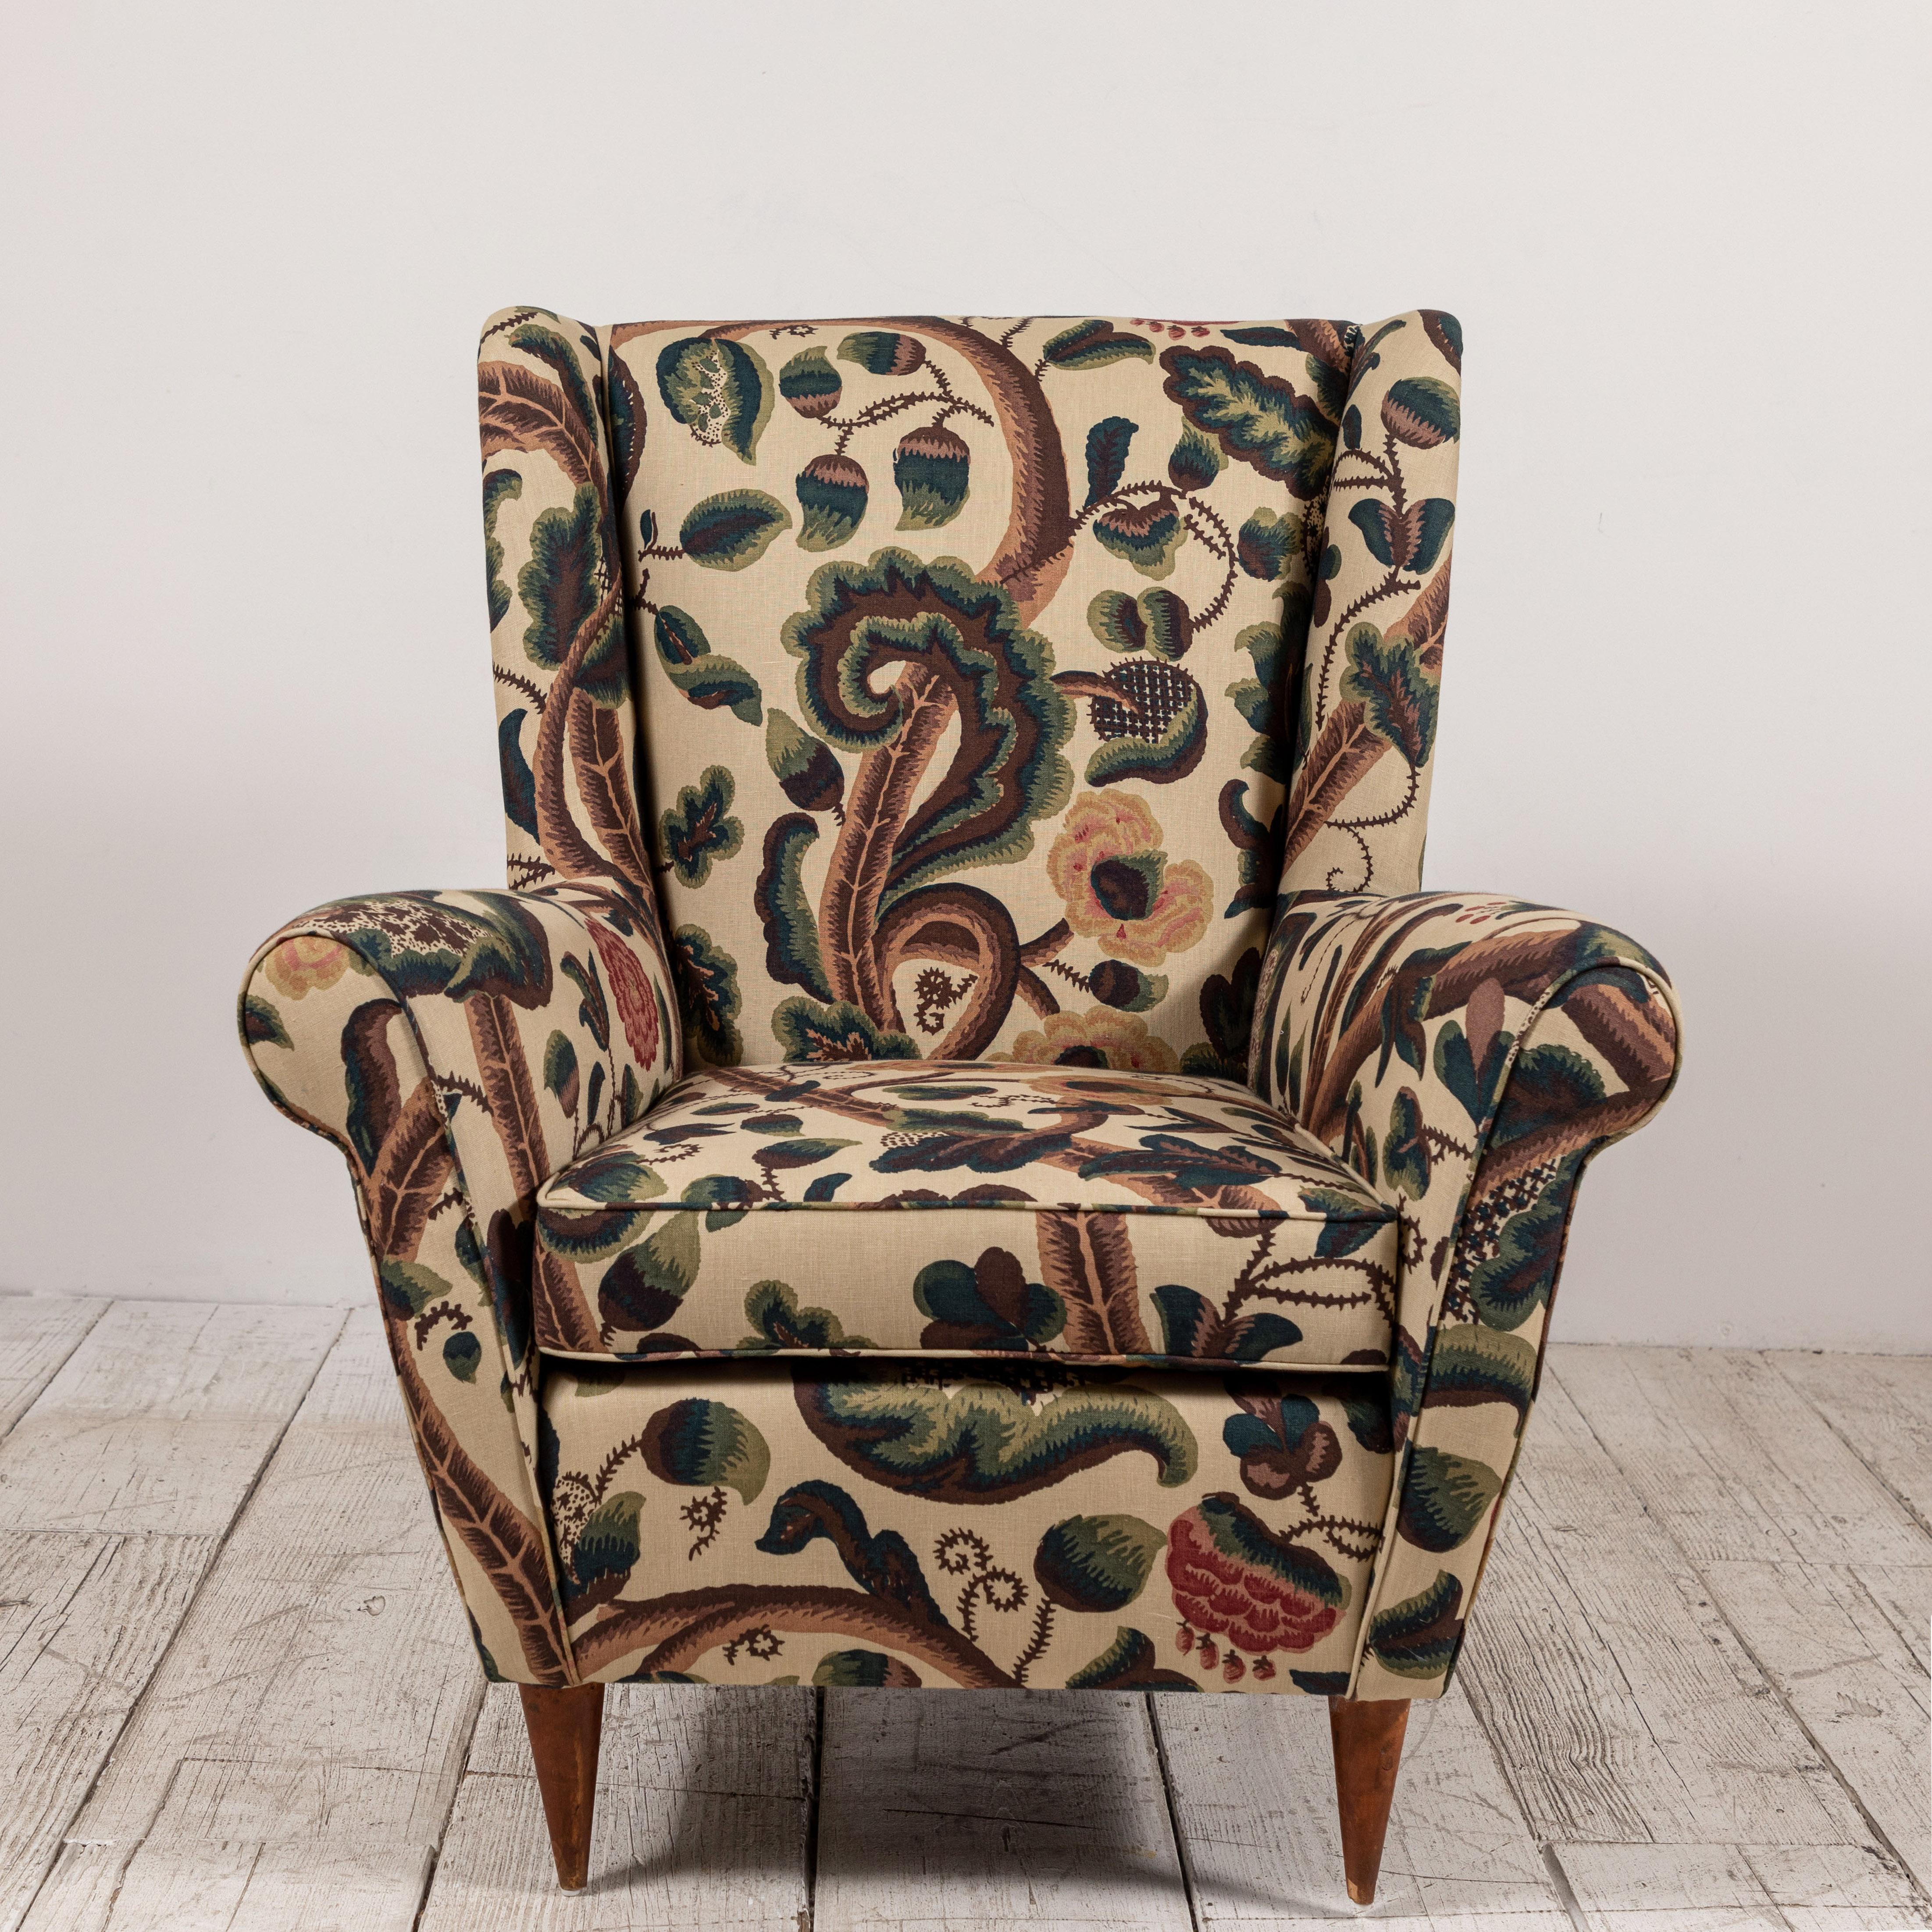 Mid-20th Century Pair of French Wingback Chairs upholstered in Floral Fabric